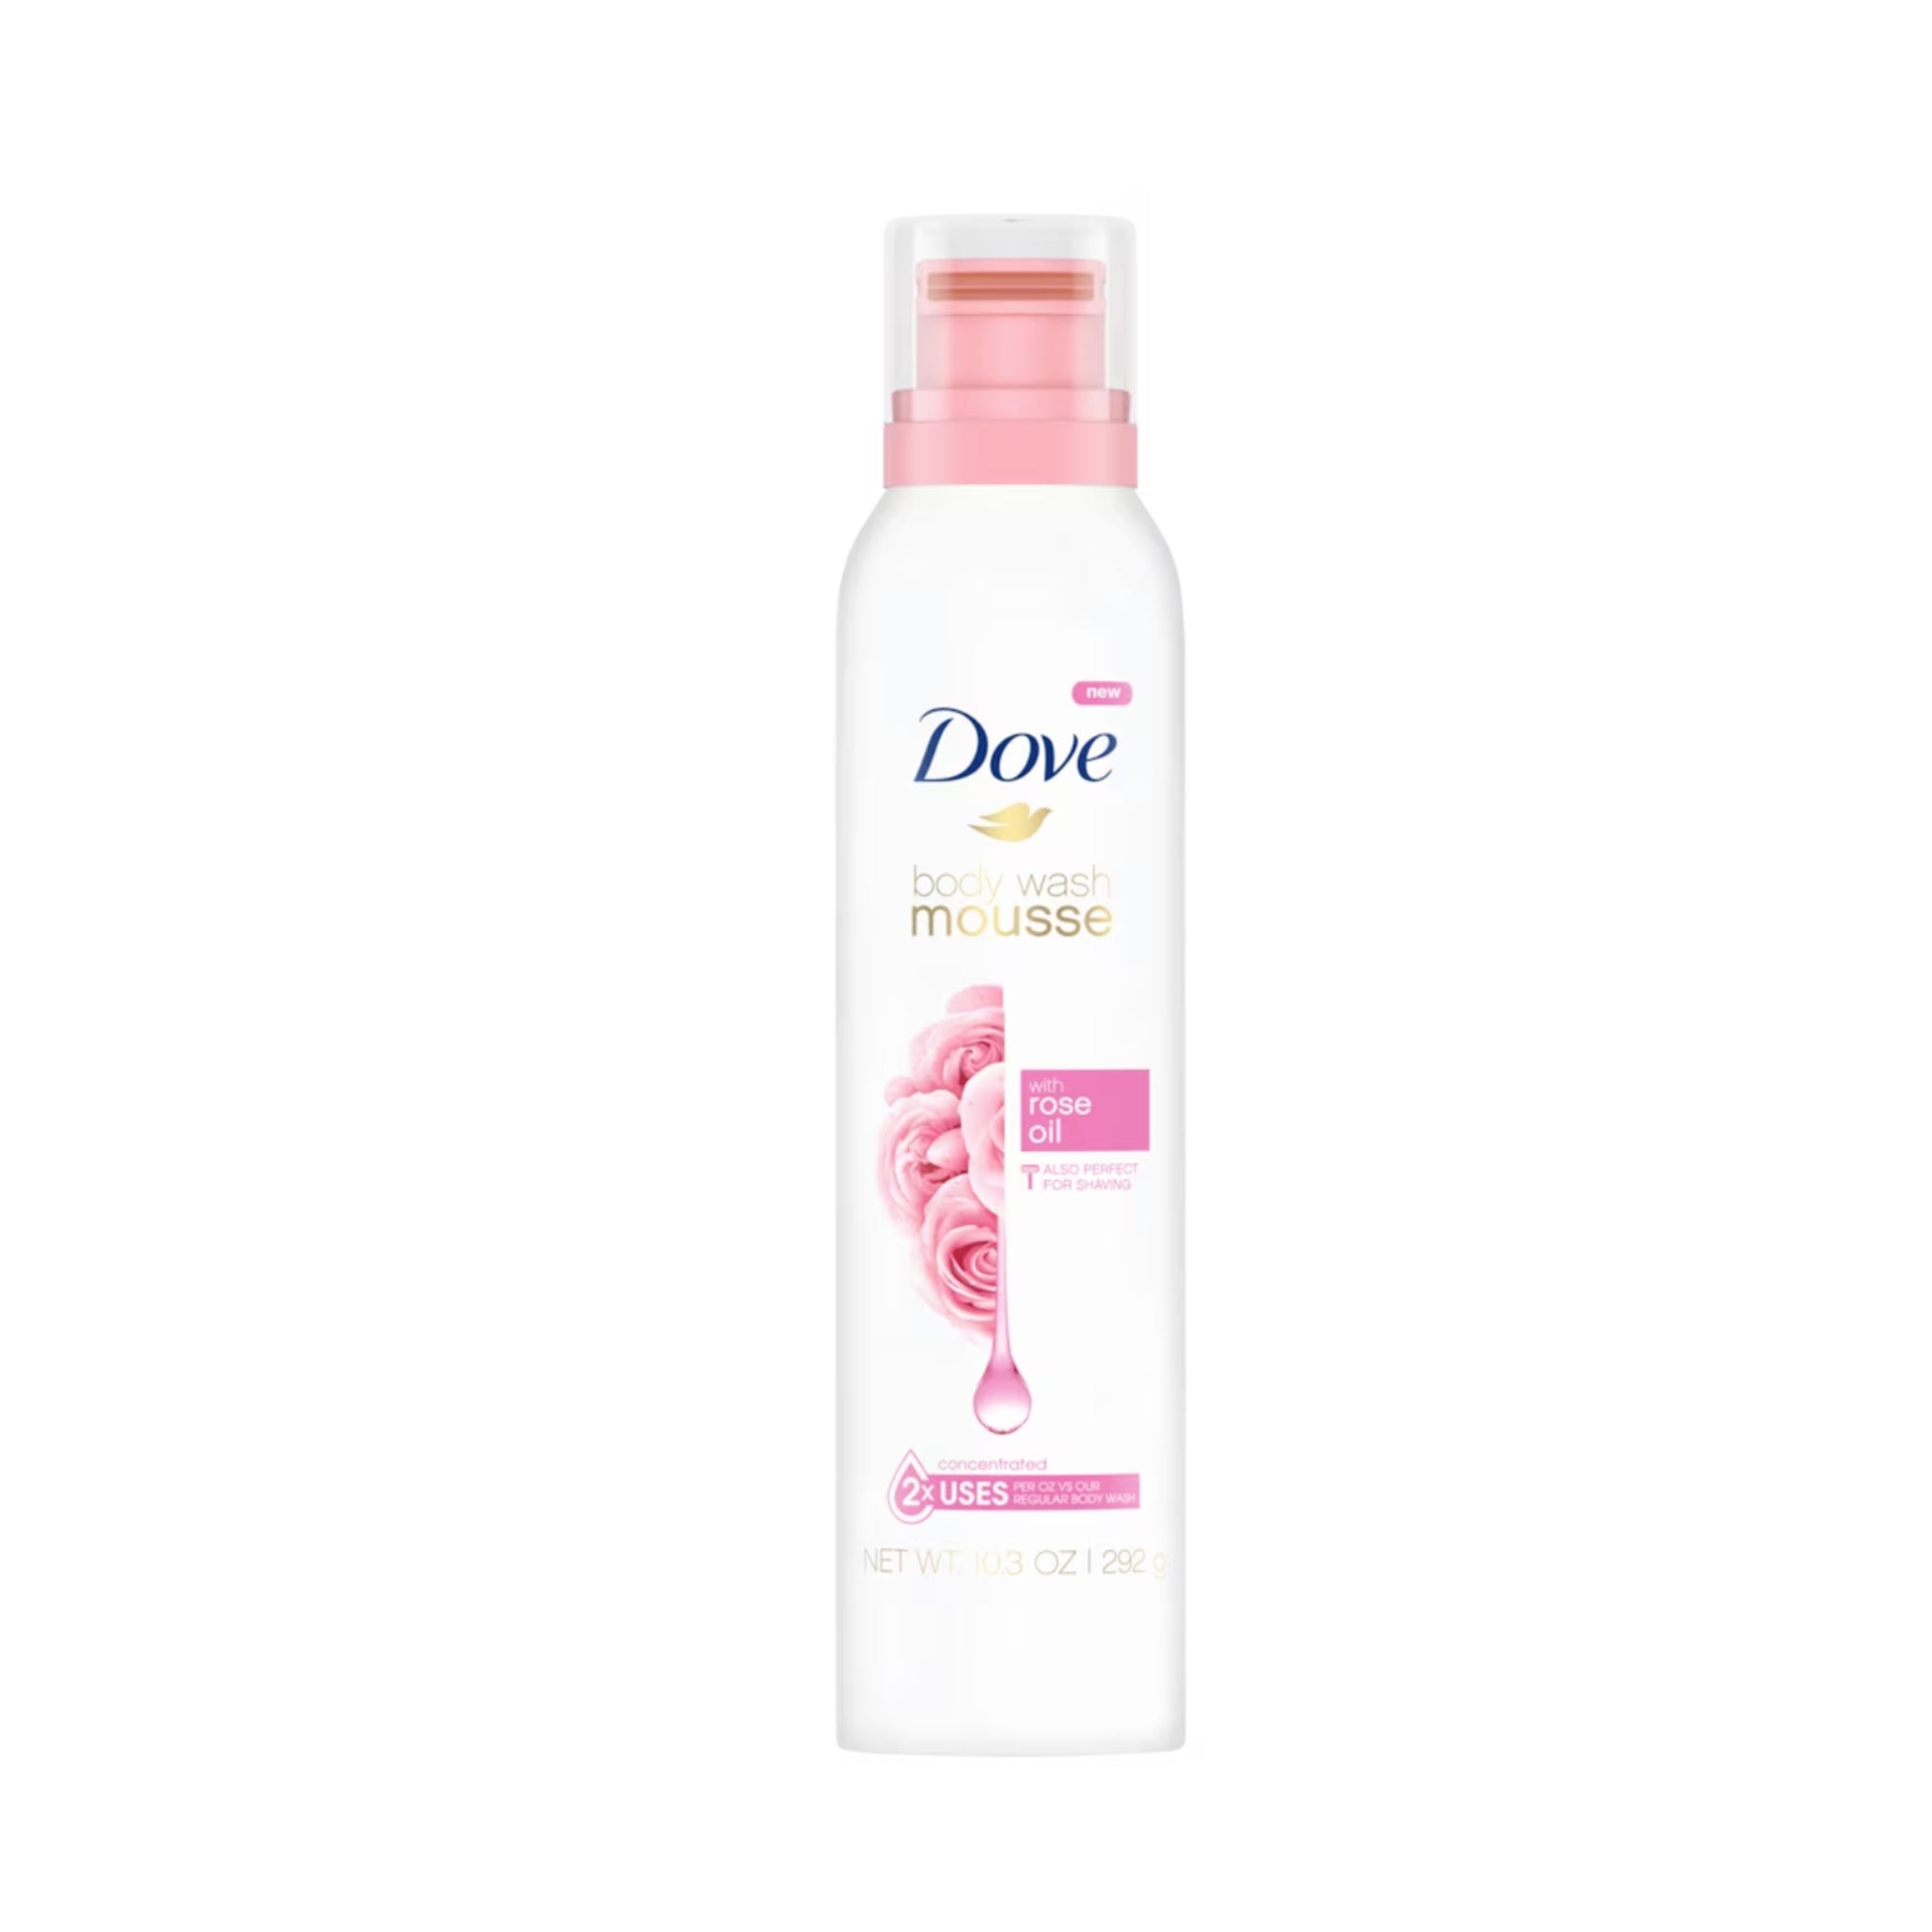 Dove Rose Oil Shower and Shave Foaming Mousse, 10.3 oz